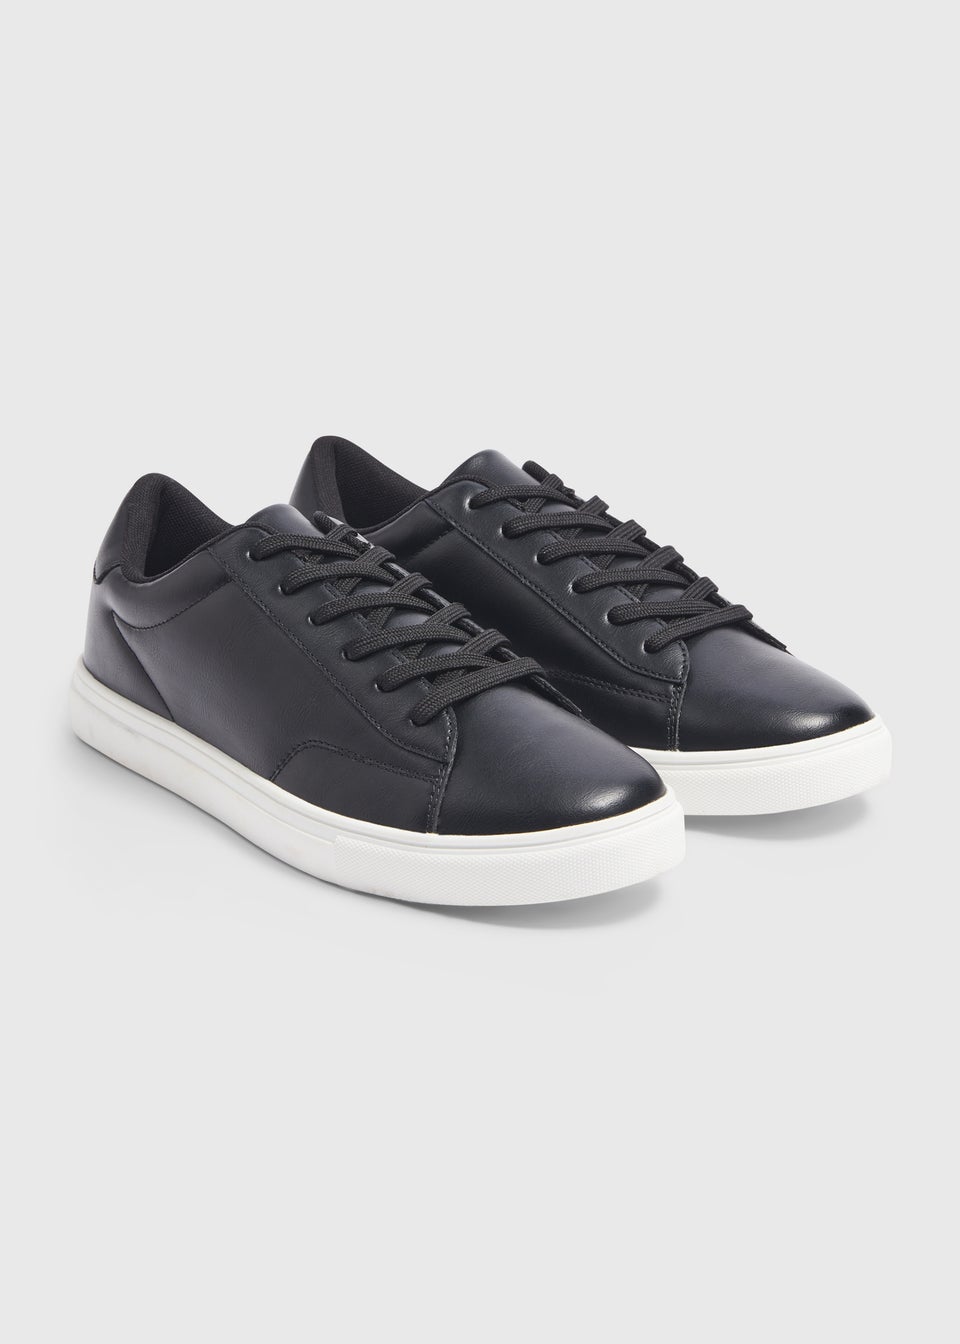 Men's Trainers & Pumps | Lace Up & Slip On Trainers - Matalan